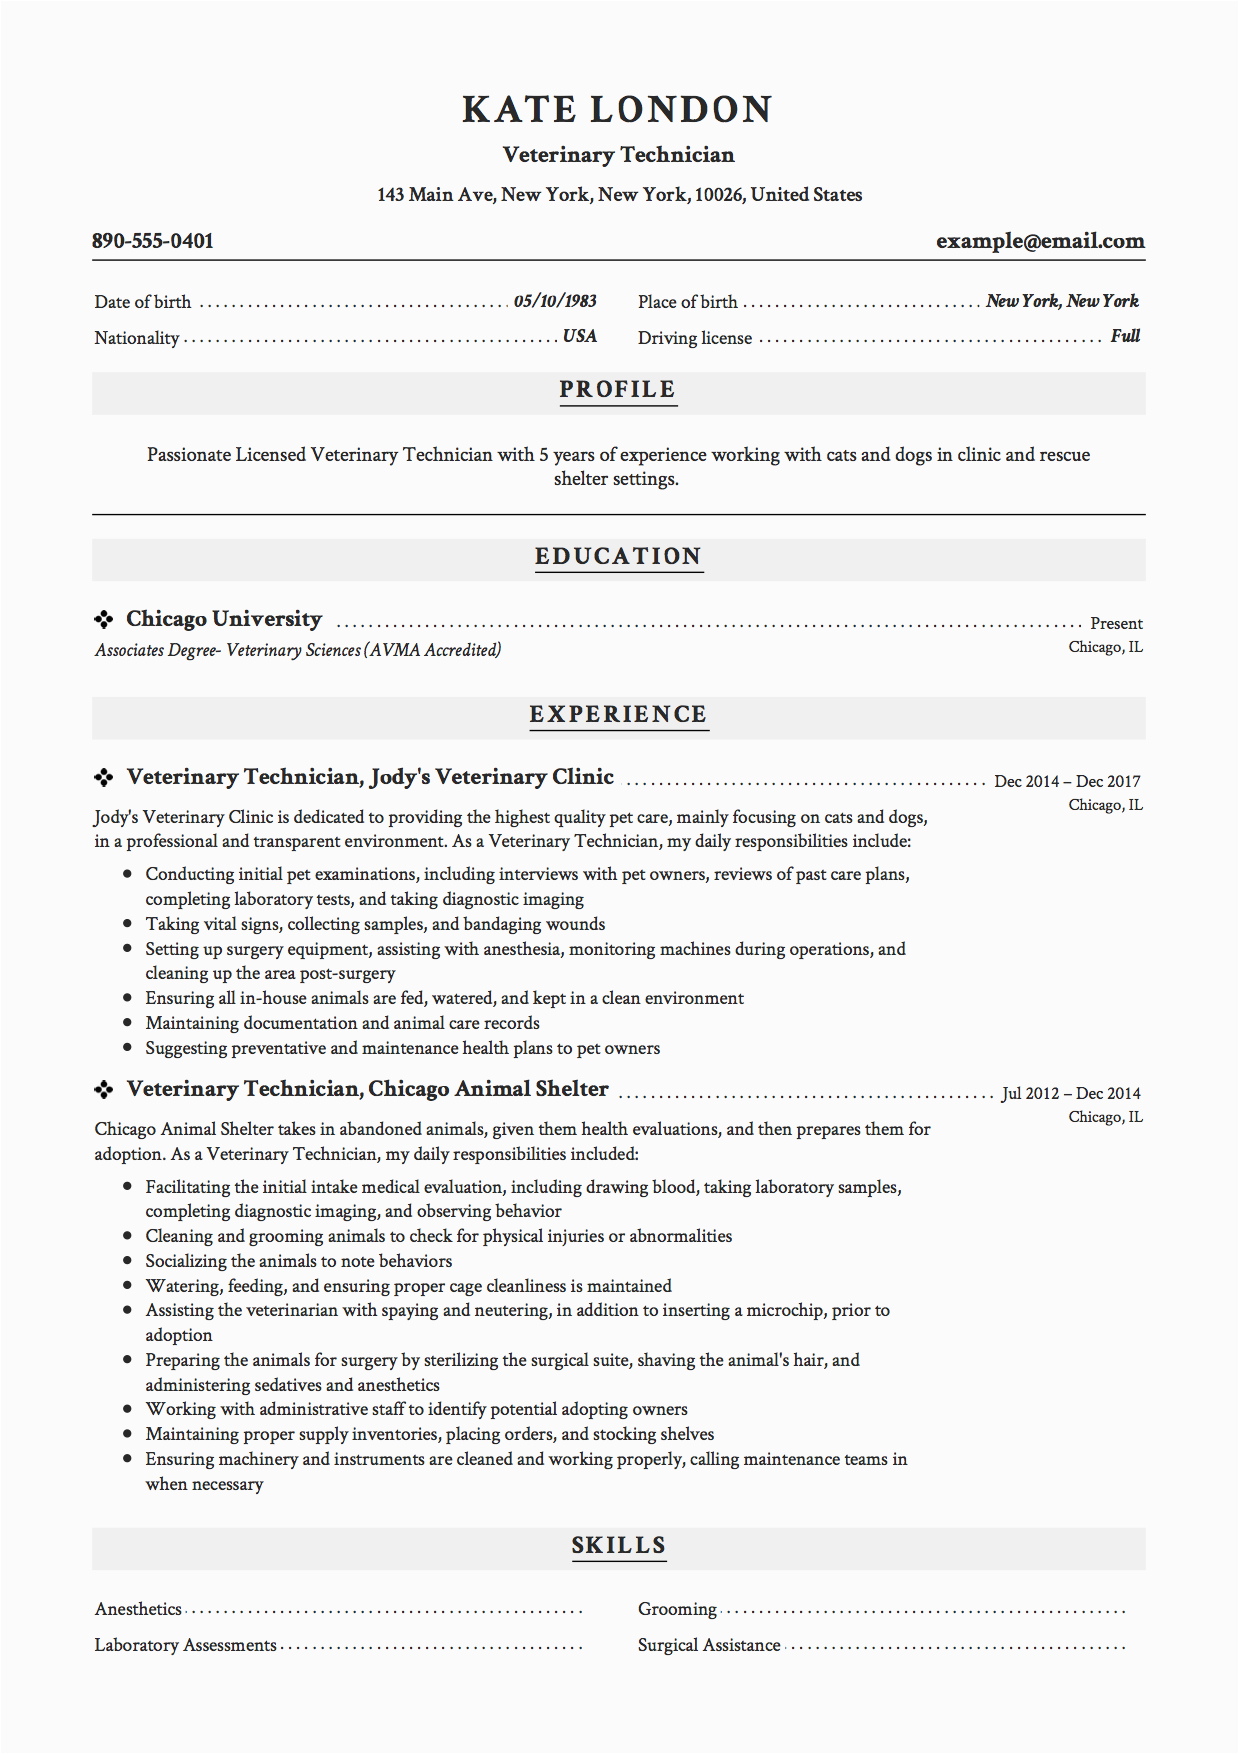 Veterinary assistant Resume Sample with No Experience Guide Veterinary Technician Resume 12 Samples Pdf 2020